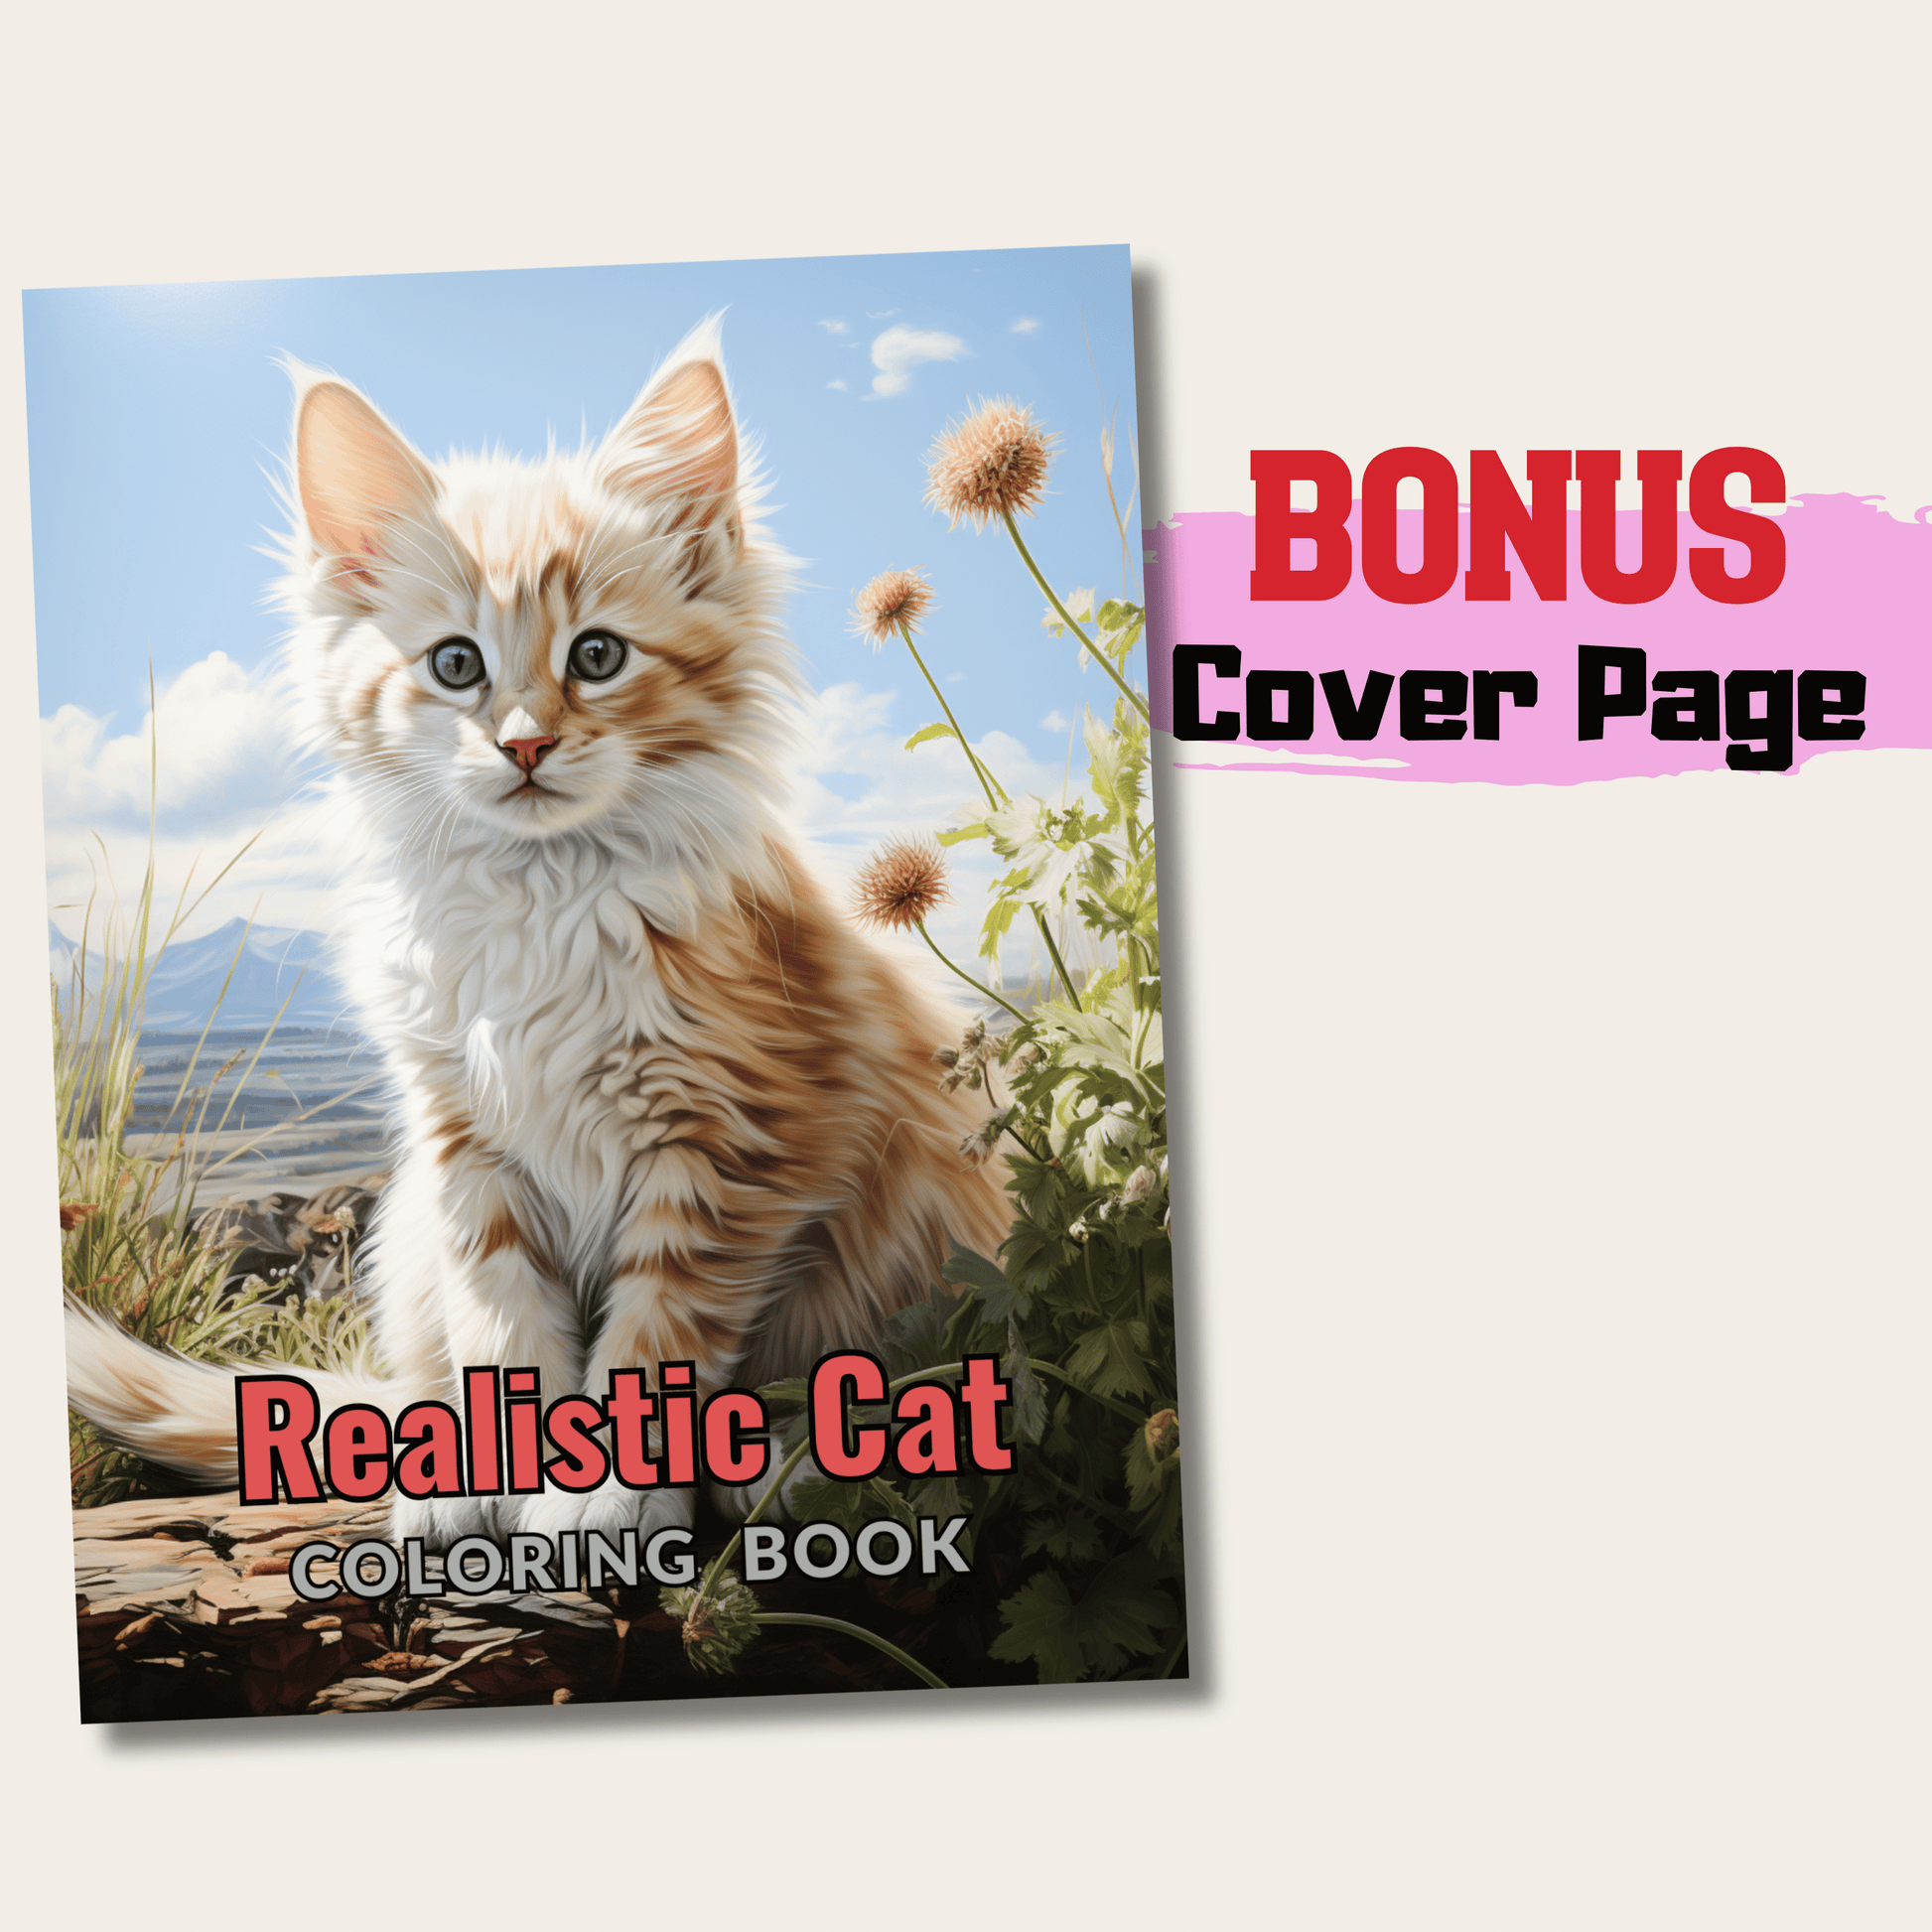 Realistic Cat Coloring Book 1: Cat Cover Page